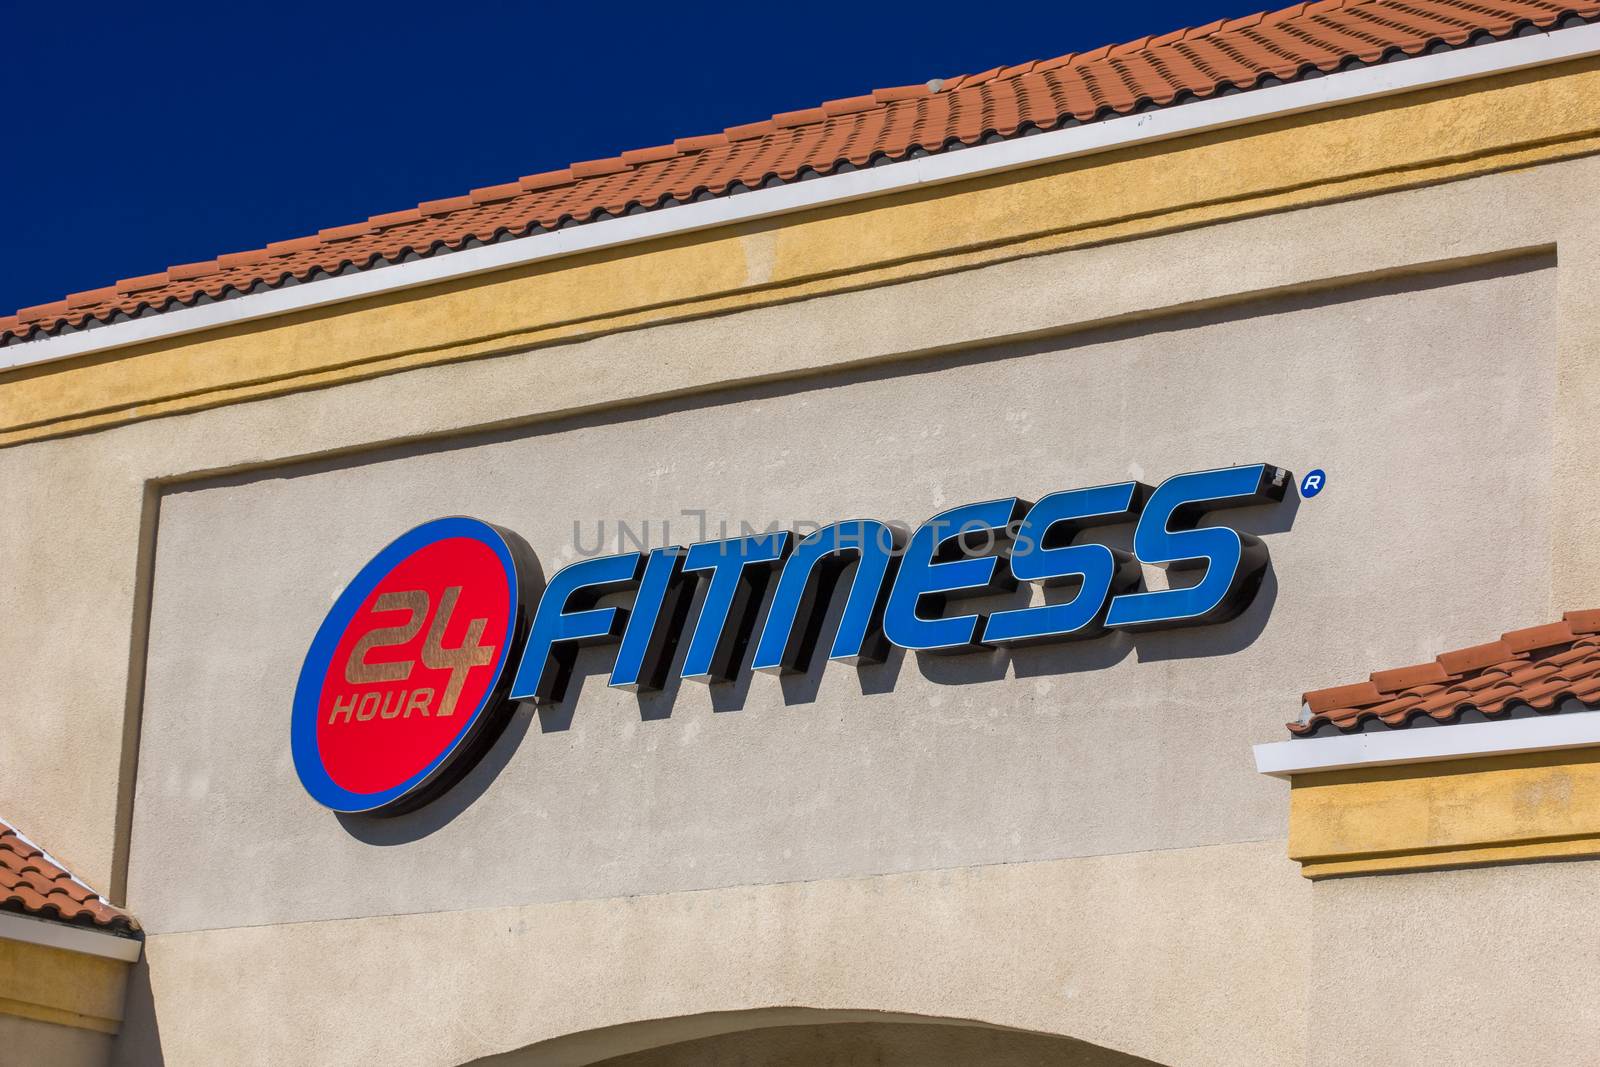 MONROVIA, CA/USA - NOVEMBER 22, 2015: 24 Fitness Center Building. 24 Hour Fitness is the world's largest privately owned d fitness center chain.